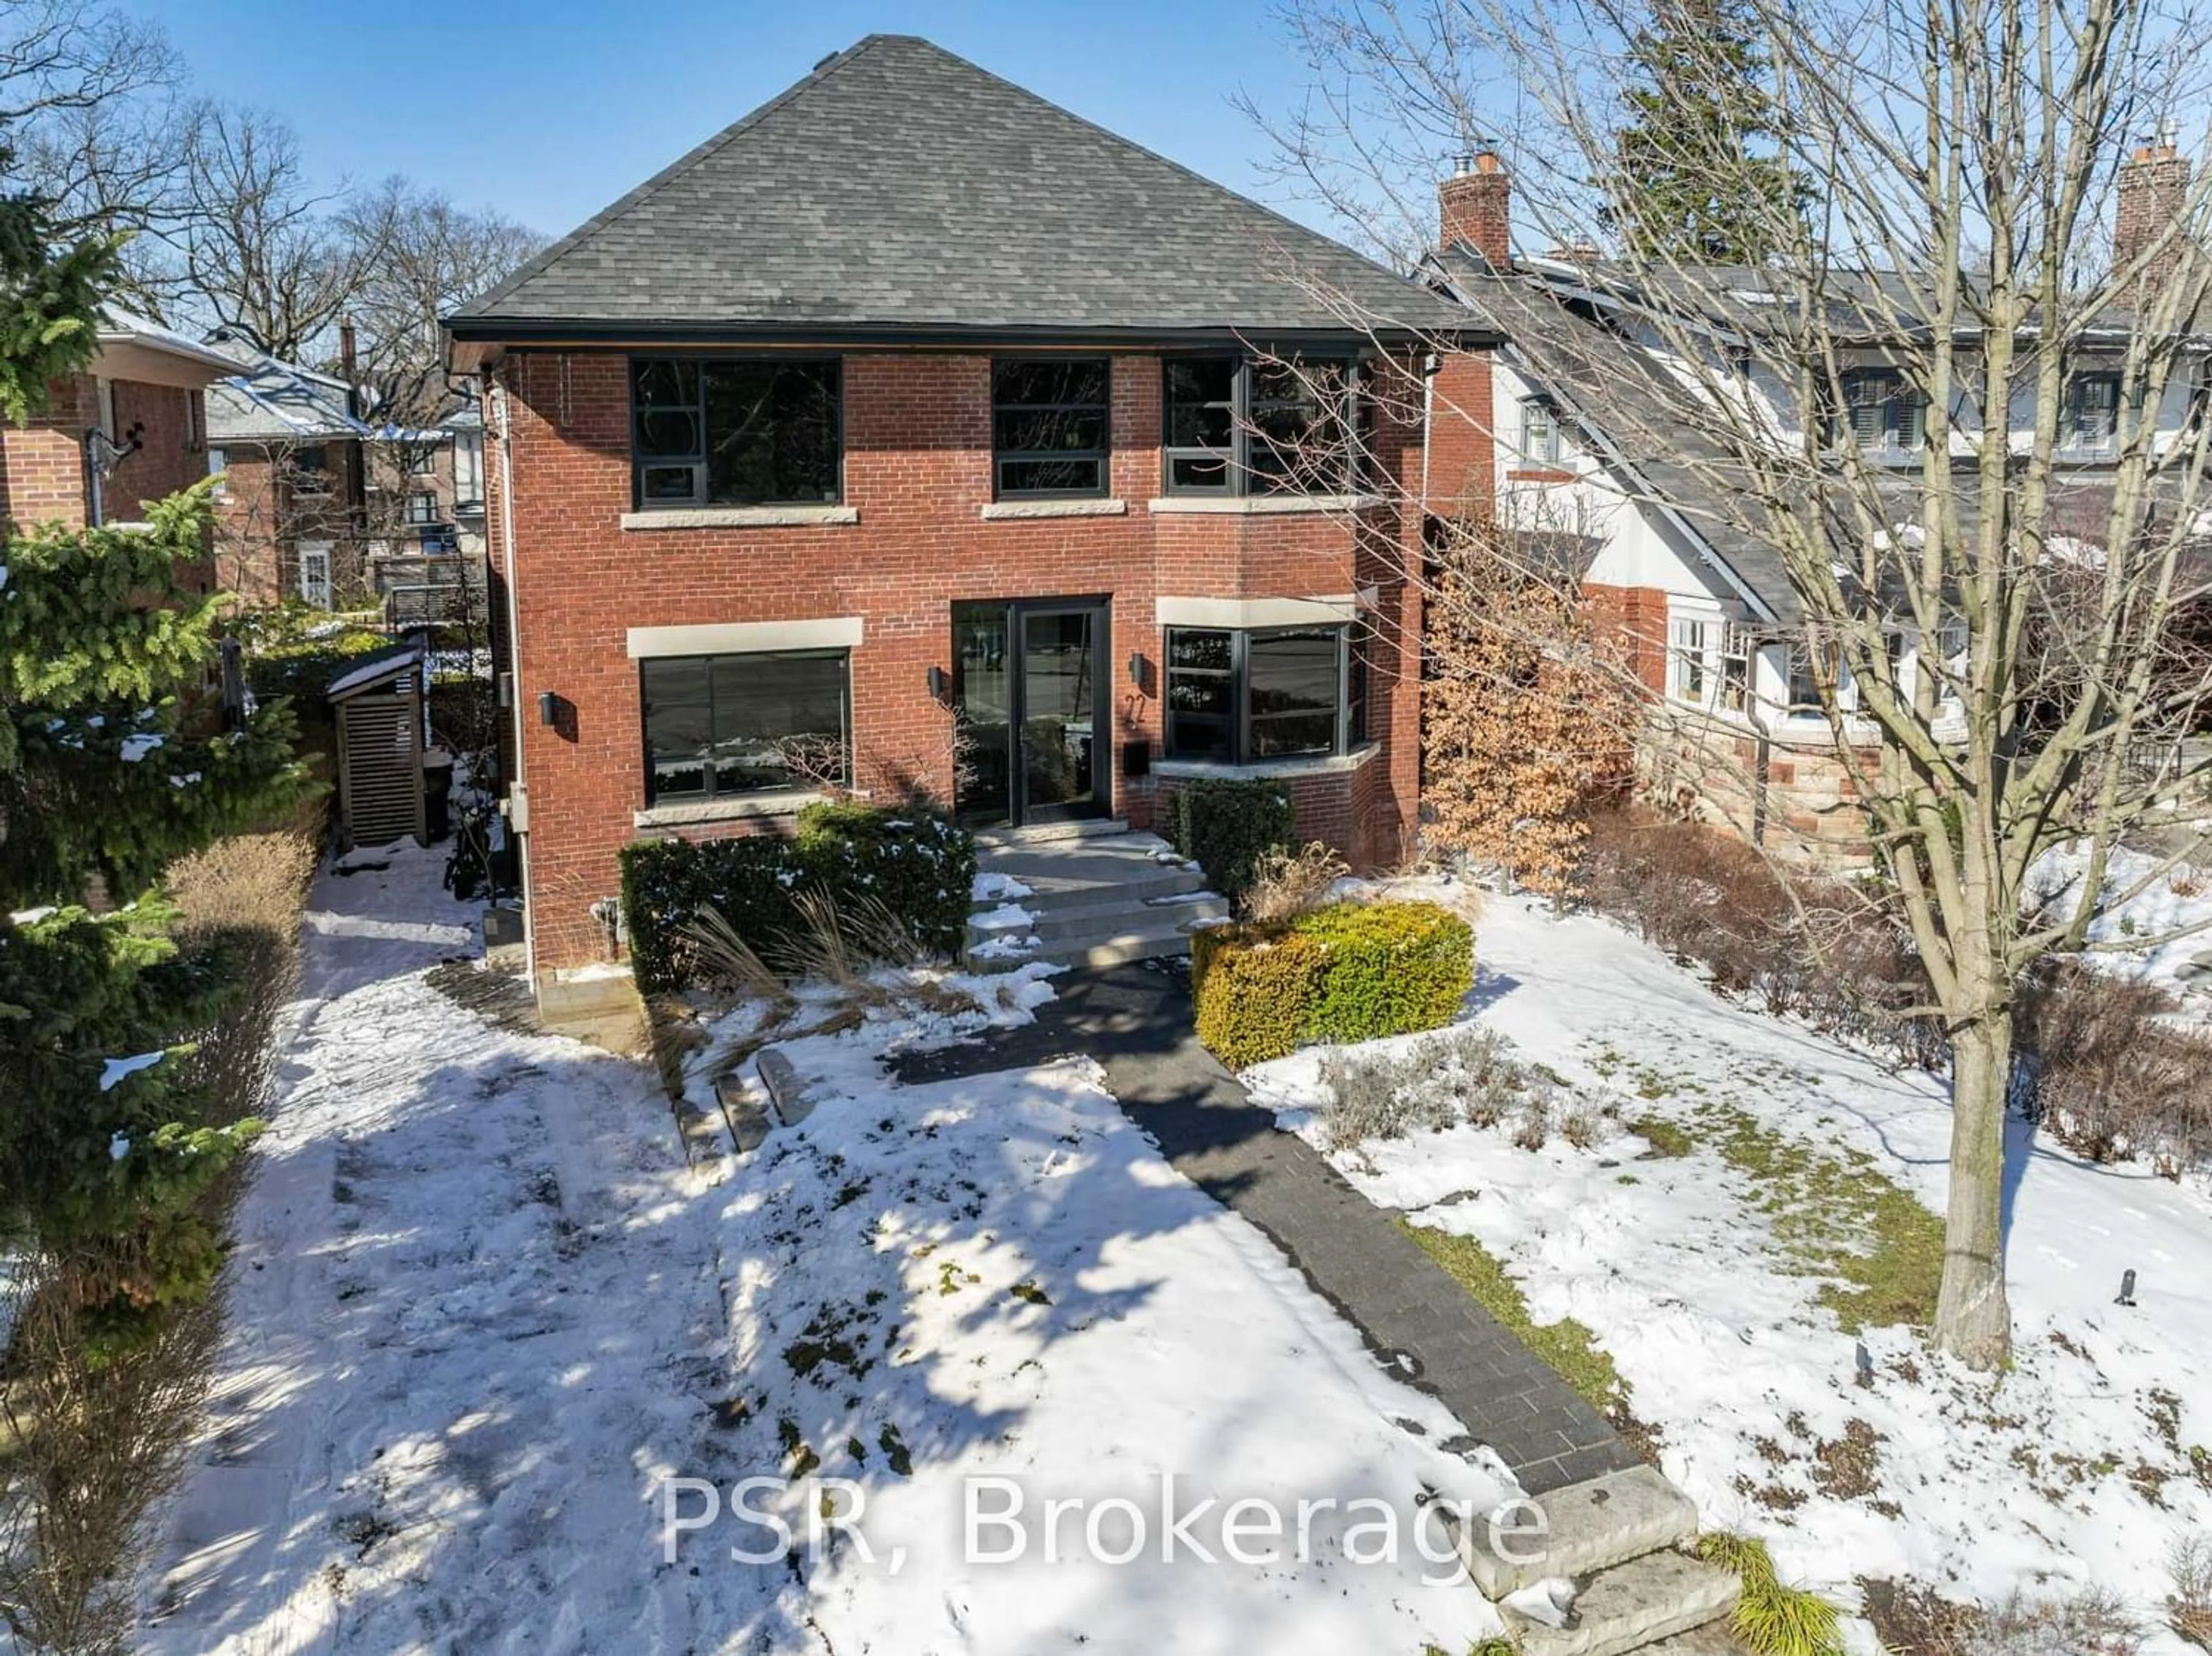 Home with brick exterior material for 22 Turner Rd, Toronto Ontario M6G 3H6